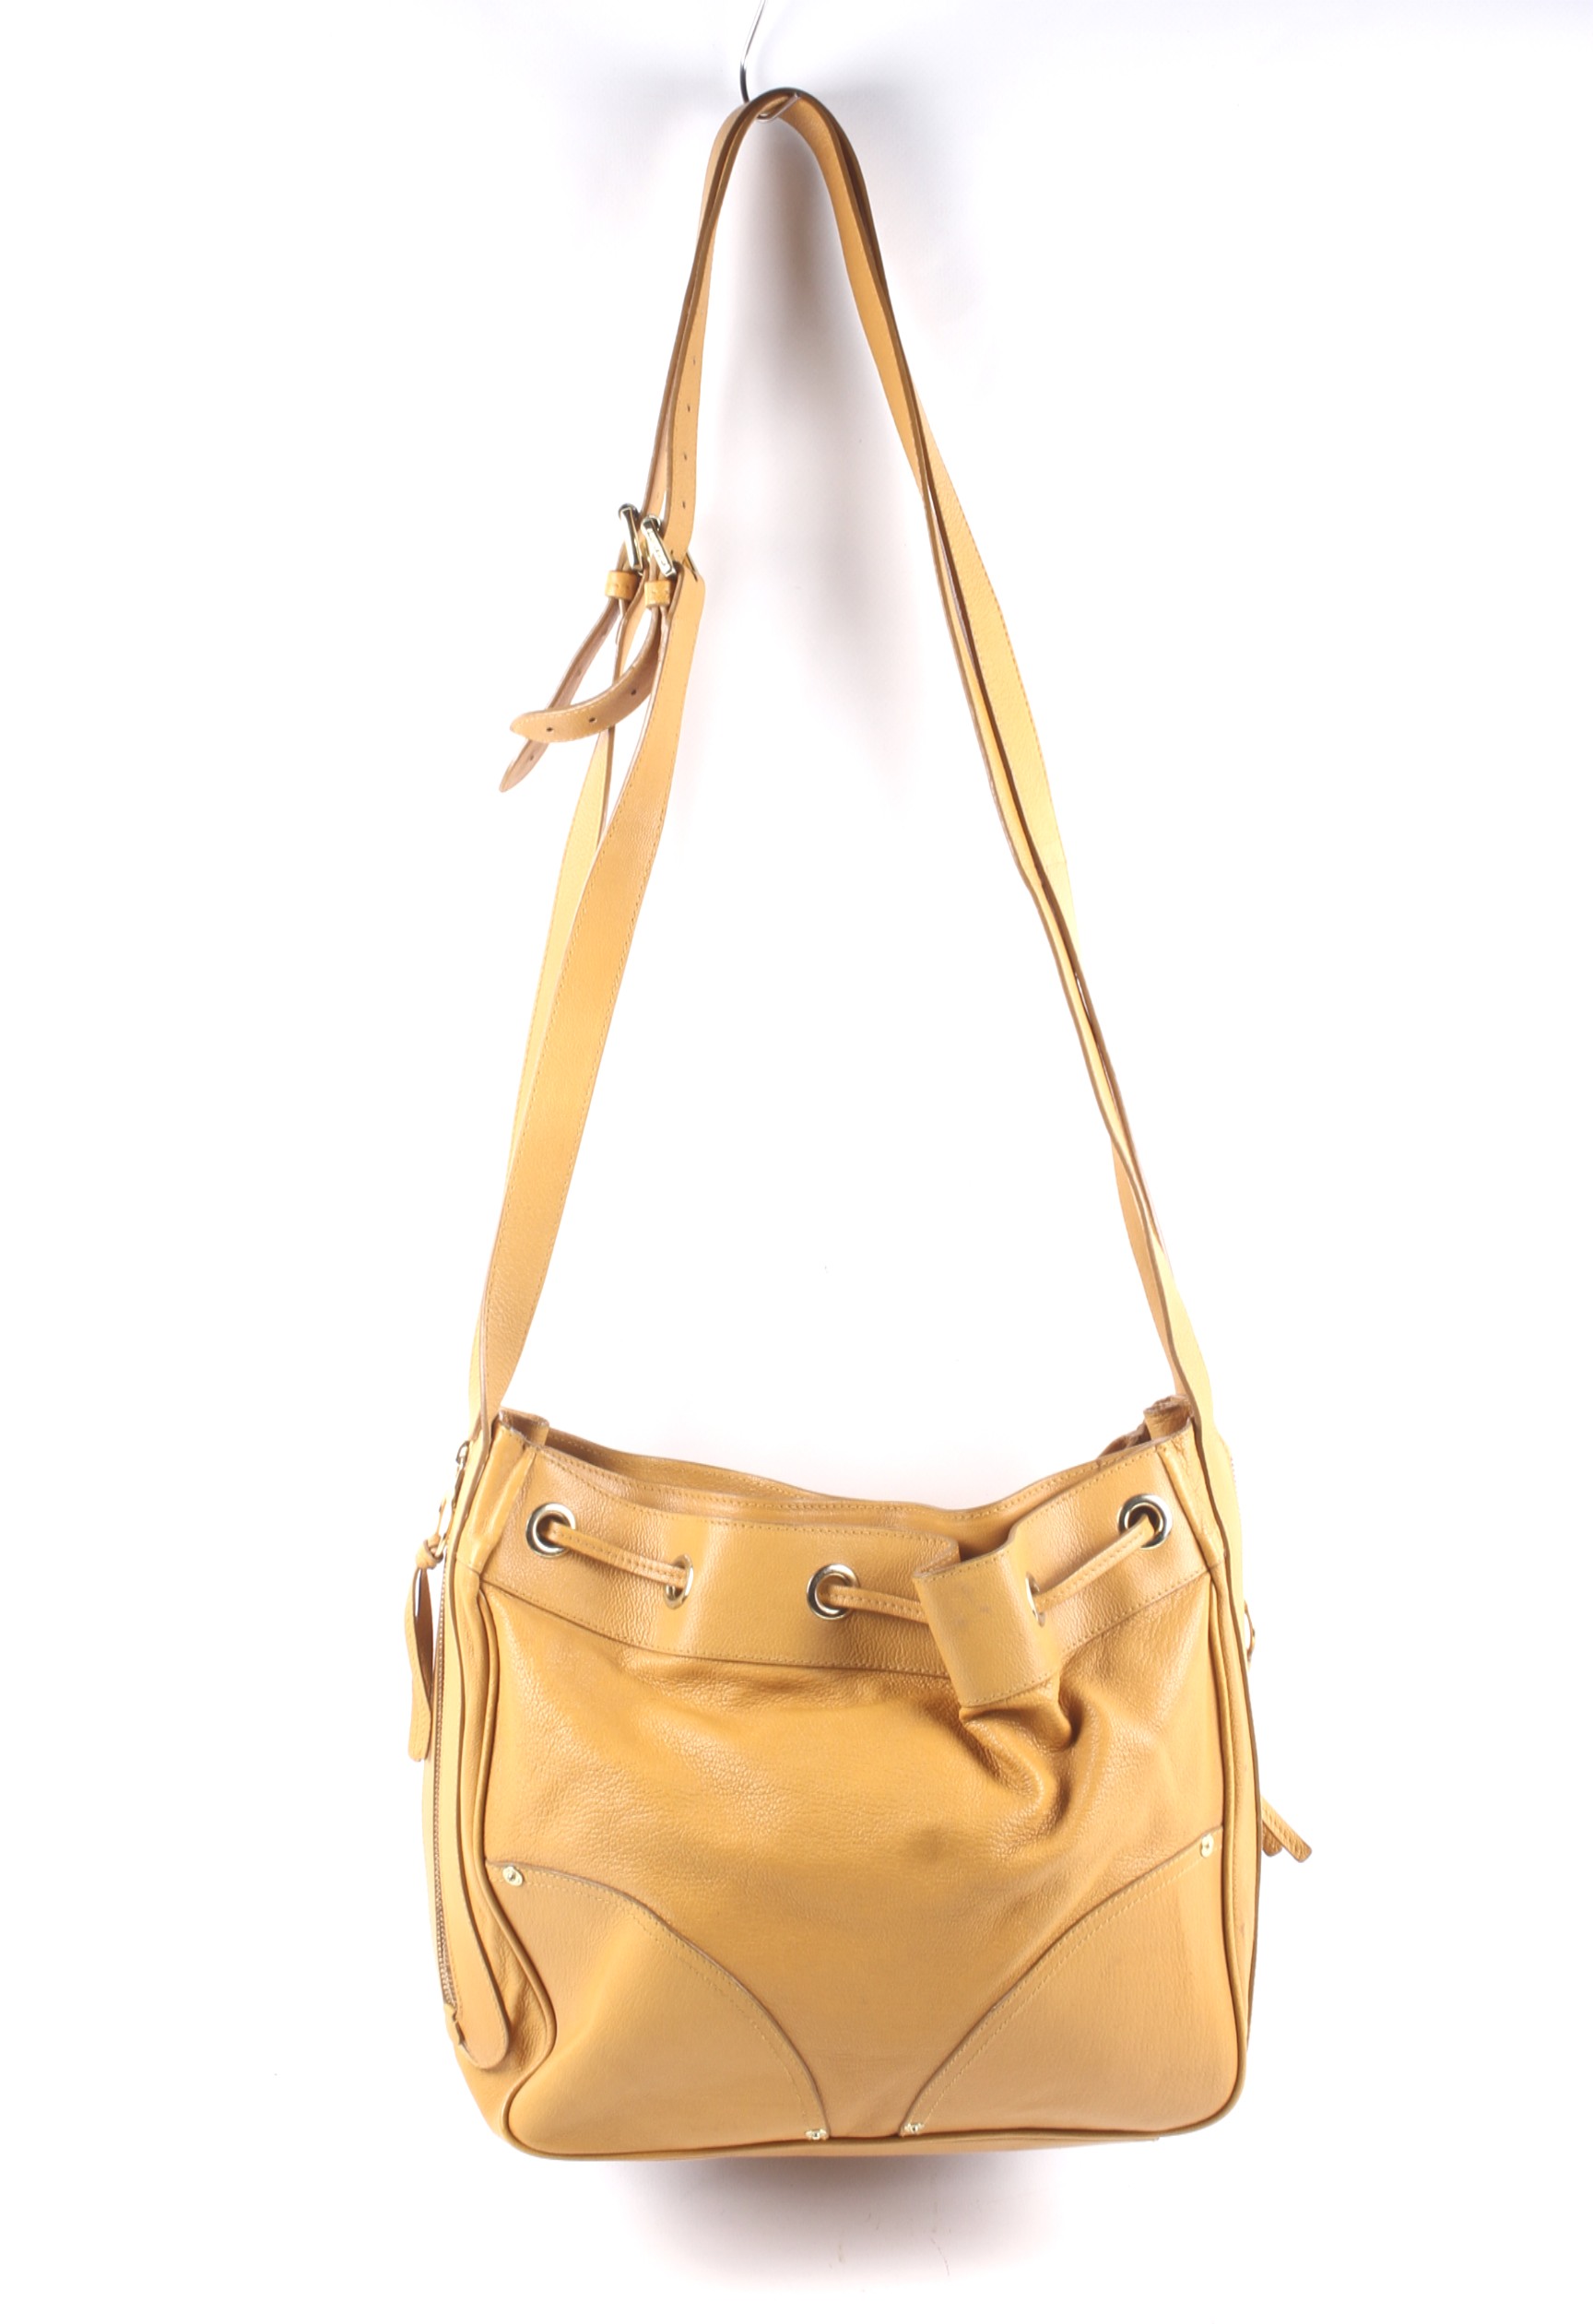 A Mulberry 'Poppy' grained mustard yellow shoulder bag.